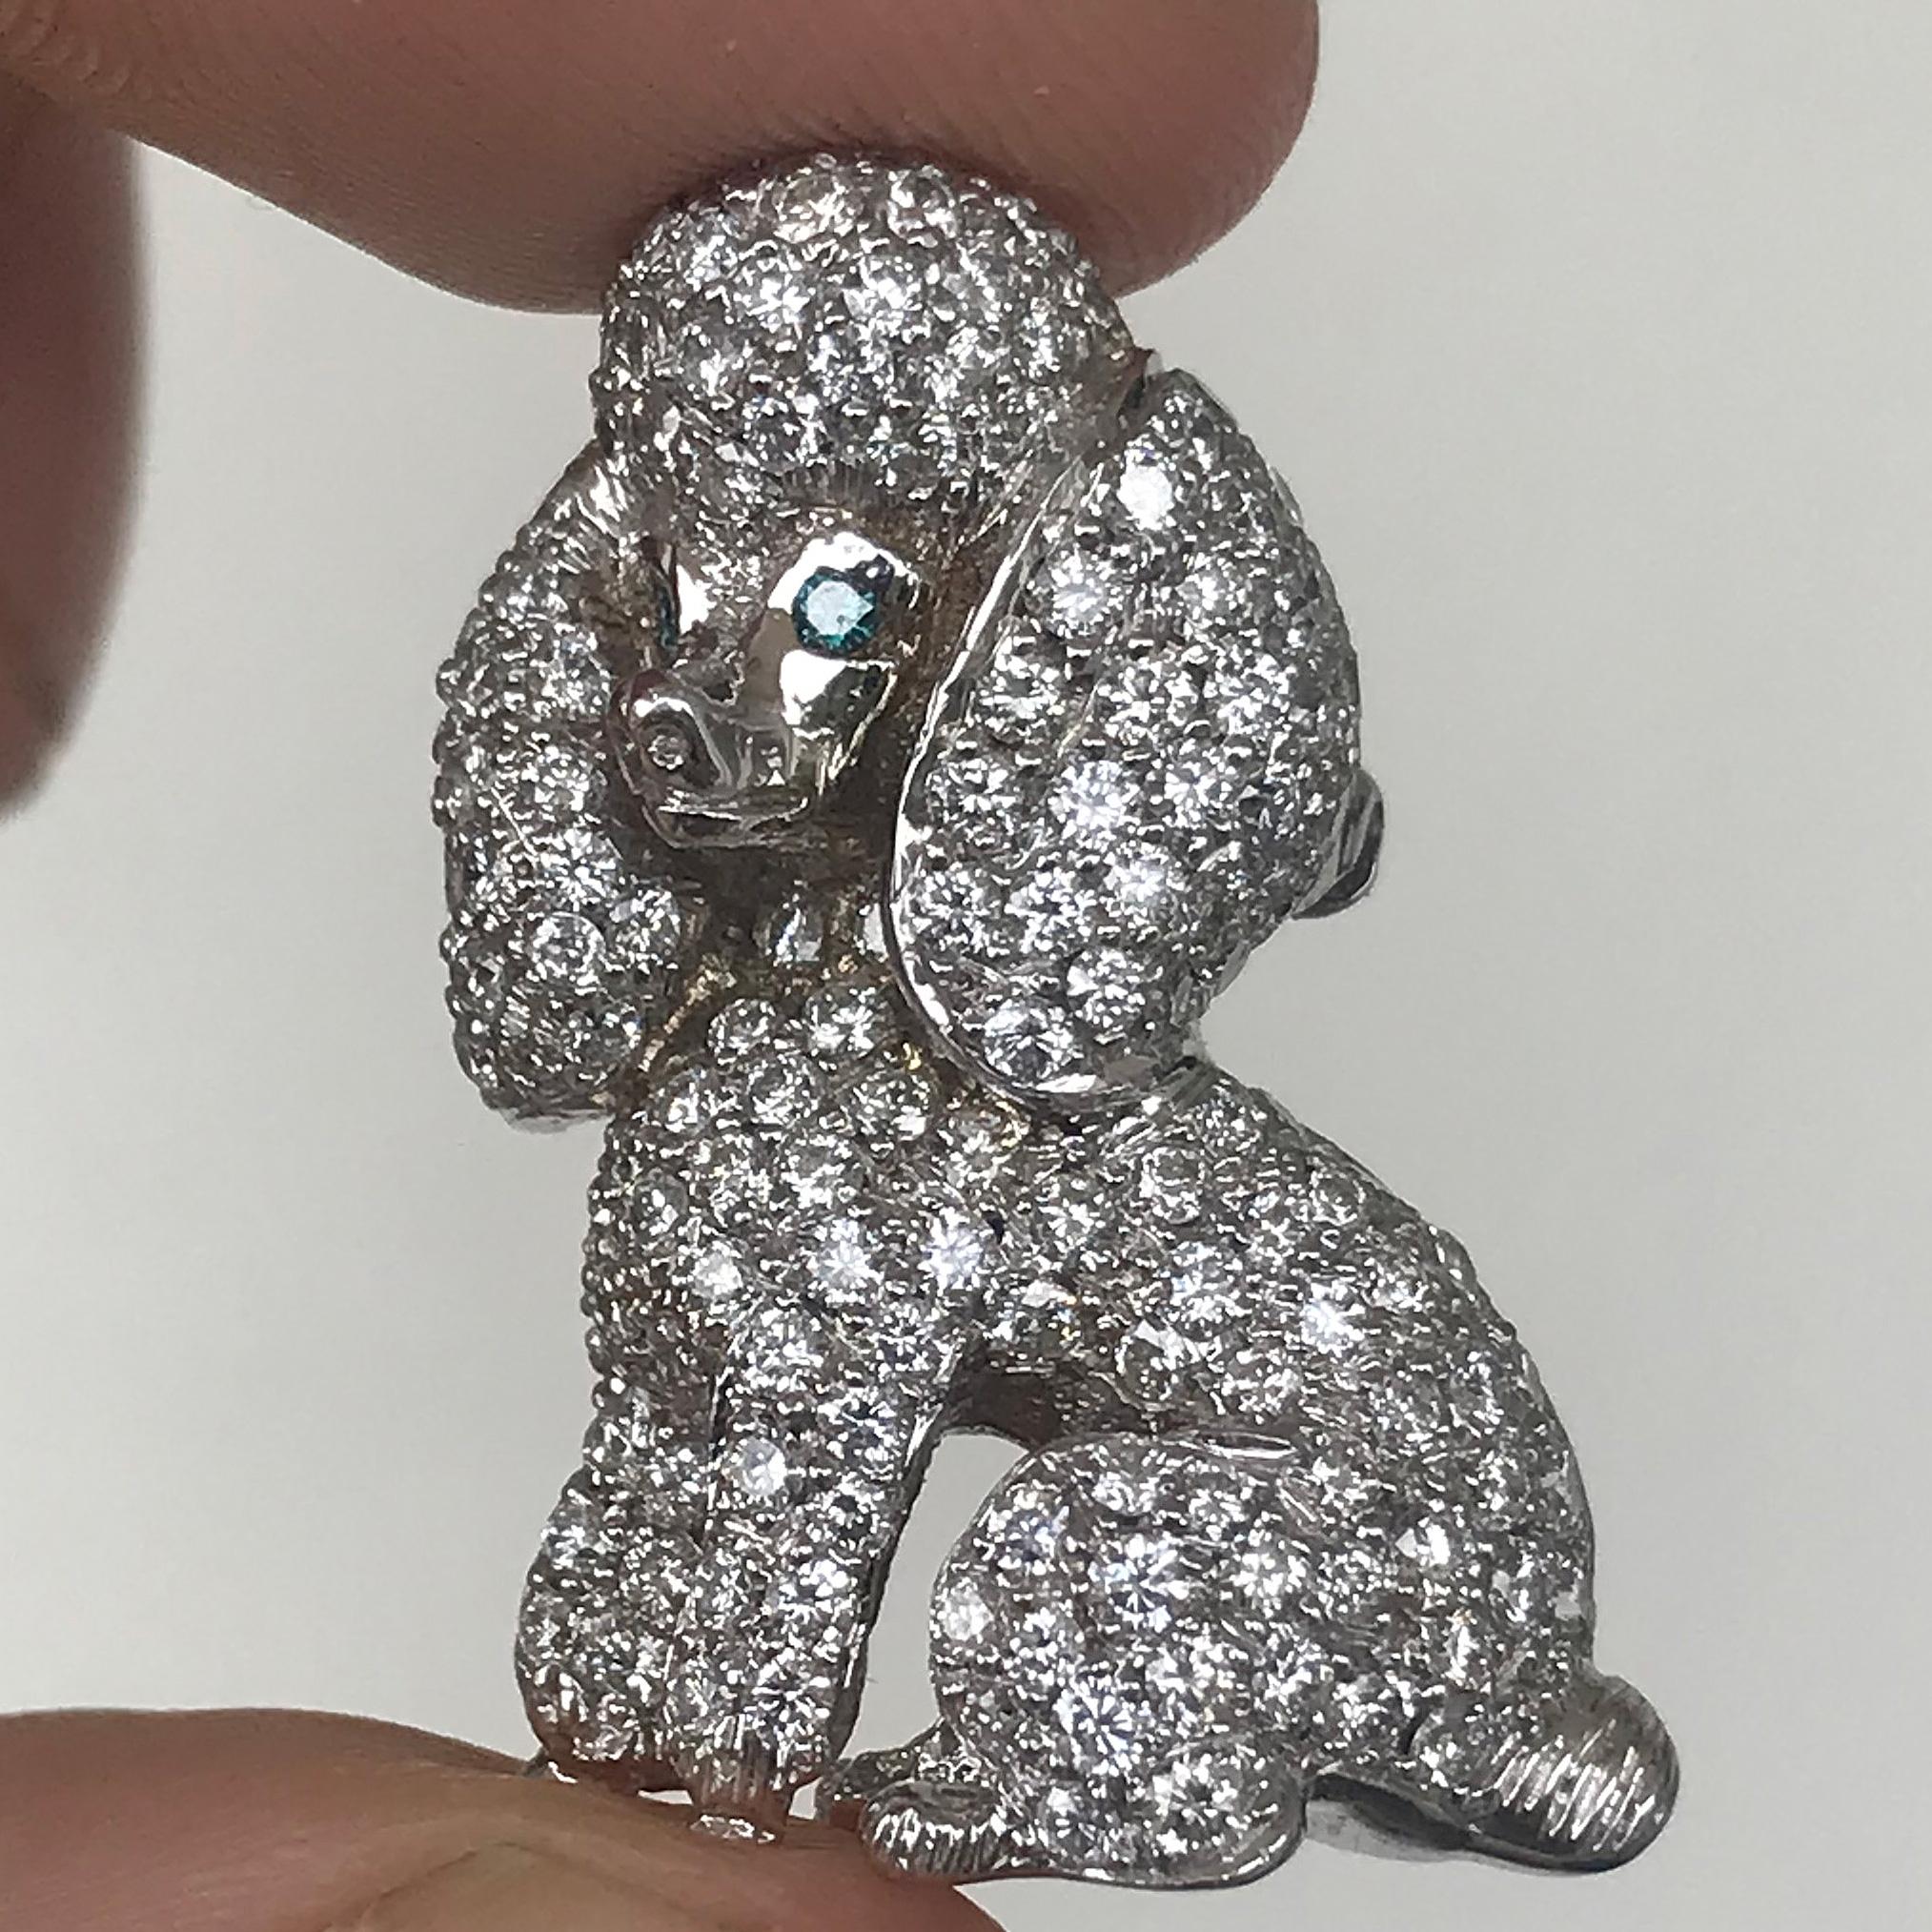 b4934003

Dog Poodle Custom Brooch - 18k Yellow Gold and White and Blue Diamond - 2+ Carats Diamonds

White Diamond Details:
Carat Weight - 2.00 CT +
Color - G-H
Clarity - VS to SI

Measurements: Approx 1 Inch Length by 0.5 Inch Wide.

Blue Diamond